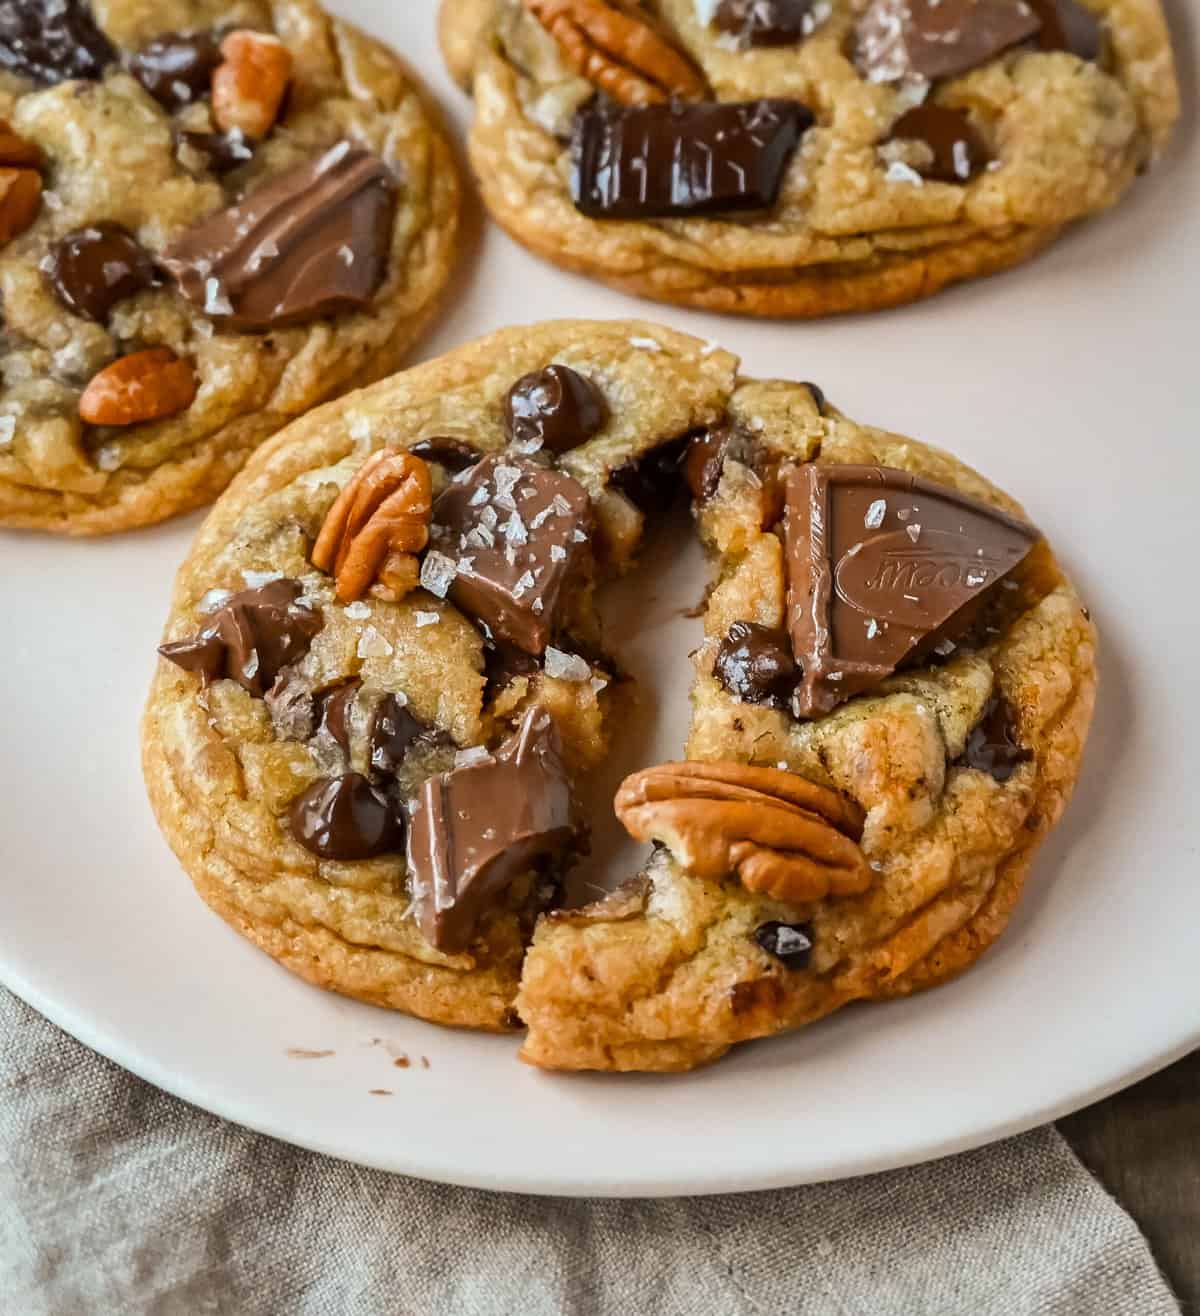 Browned Butter Pecan Chocolate Chunk Cookies. hese rich, buttery browned butter pecan cookies with chocolate chunks are the perfect soft, chewy, and nutty cookie. The browned butter is the star ingredient!